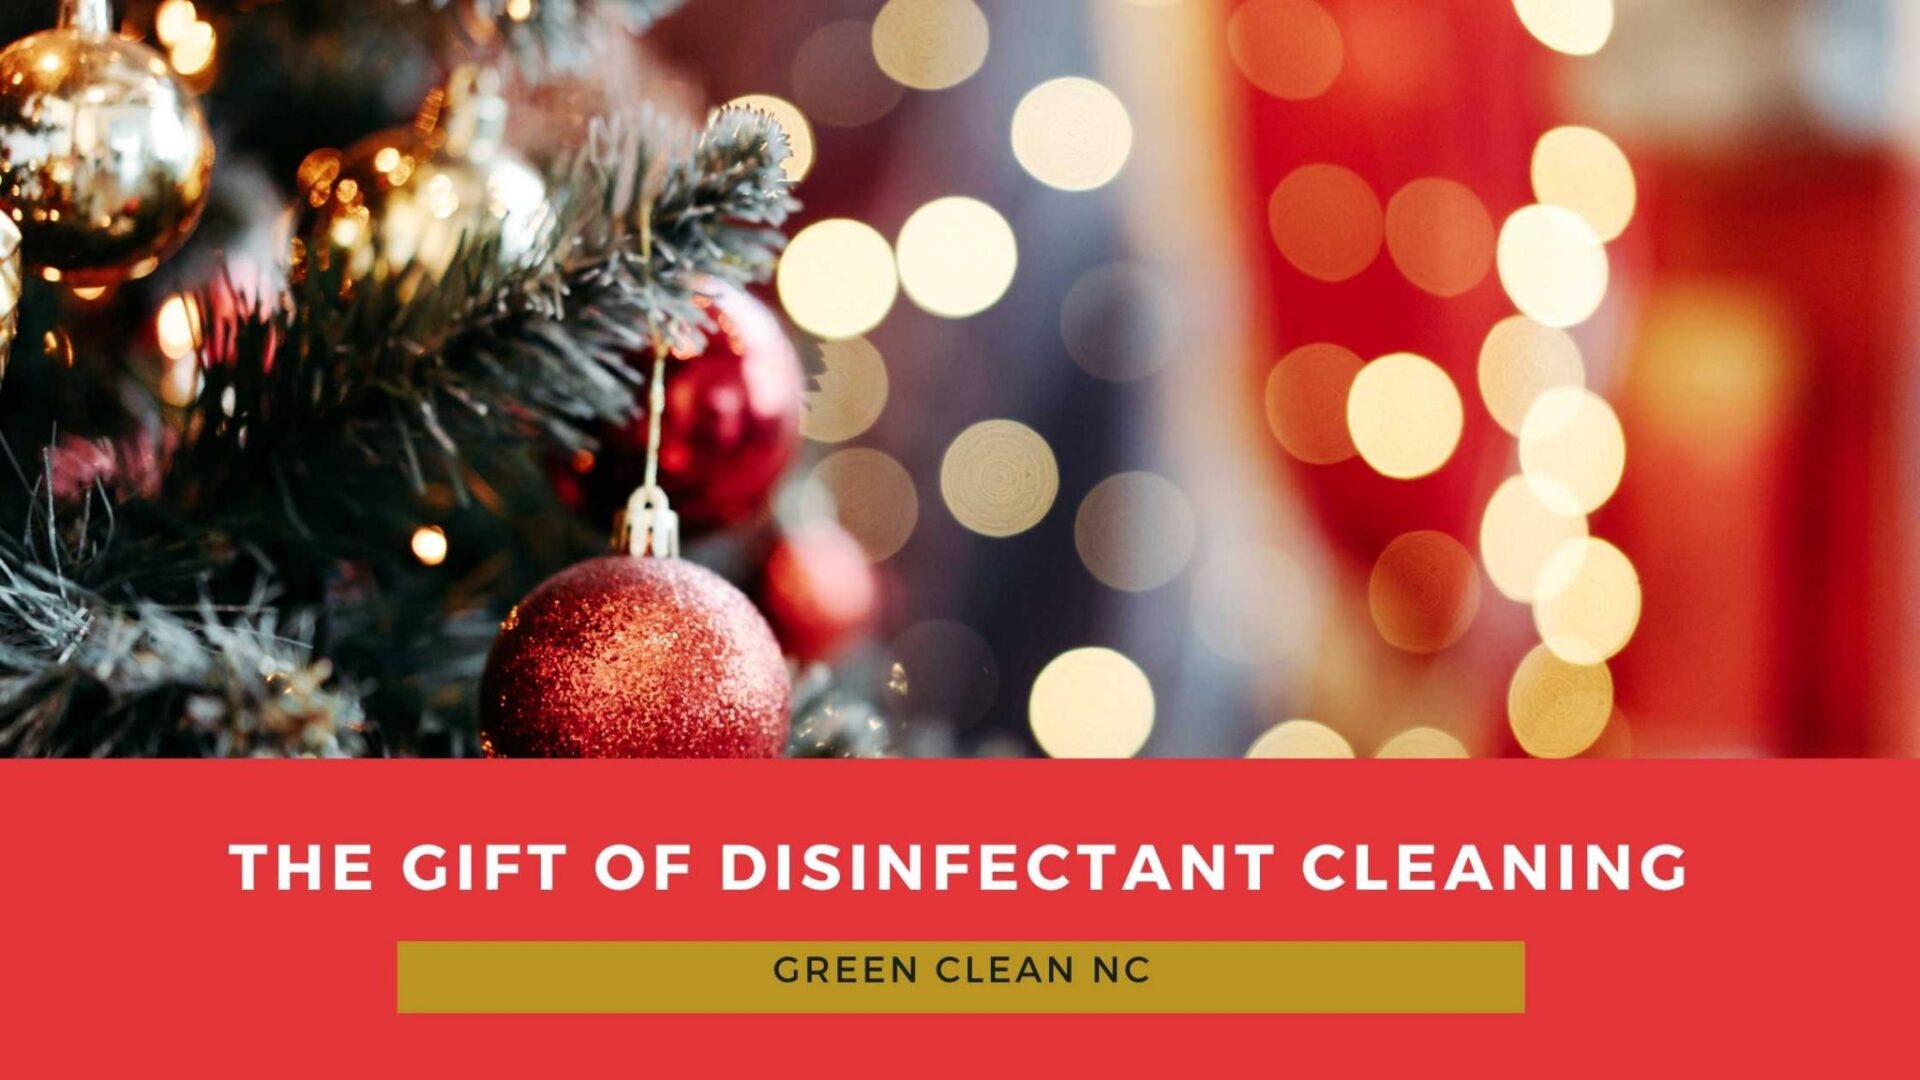 The Gift of Disinfectant Cleaning